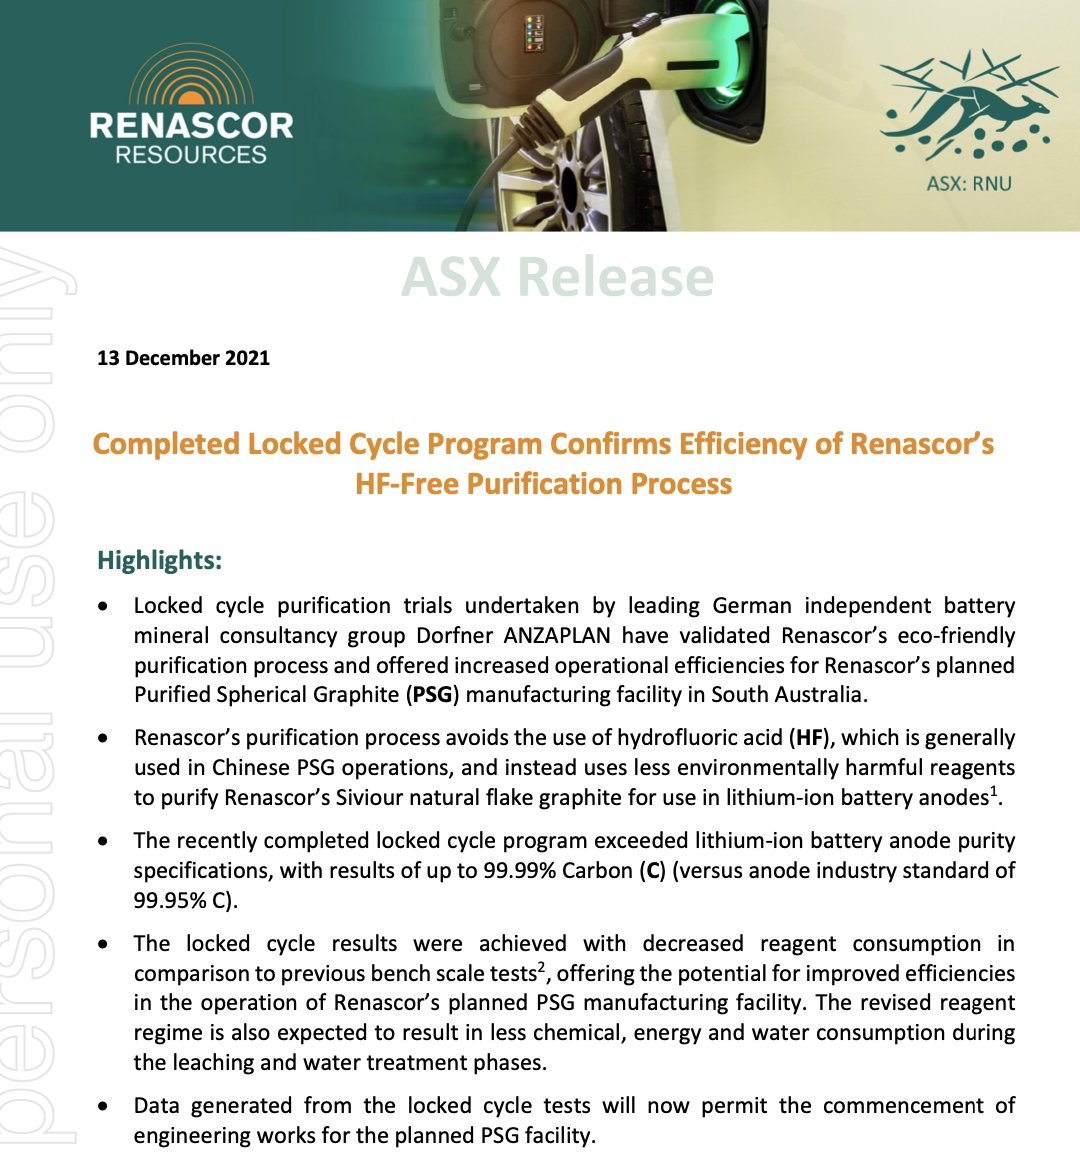 Renascor aims to produce 100% Australian-made #Battery-grade #Graphite at globally competitive costs, while delivering positive #ESG outcomes. #PurifiedSphericalGraphite.  #criticalminerals #ESGinvesting #CleanEnergy #Sustainability #HFfree $RNU #RNU